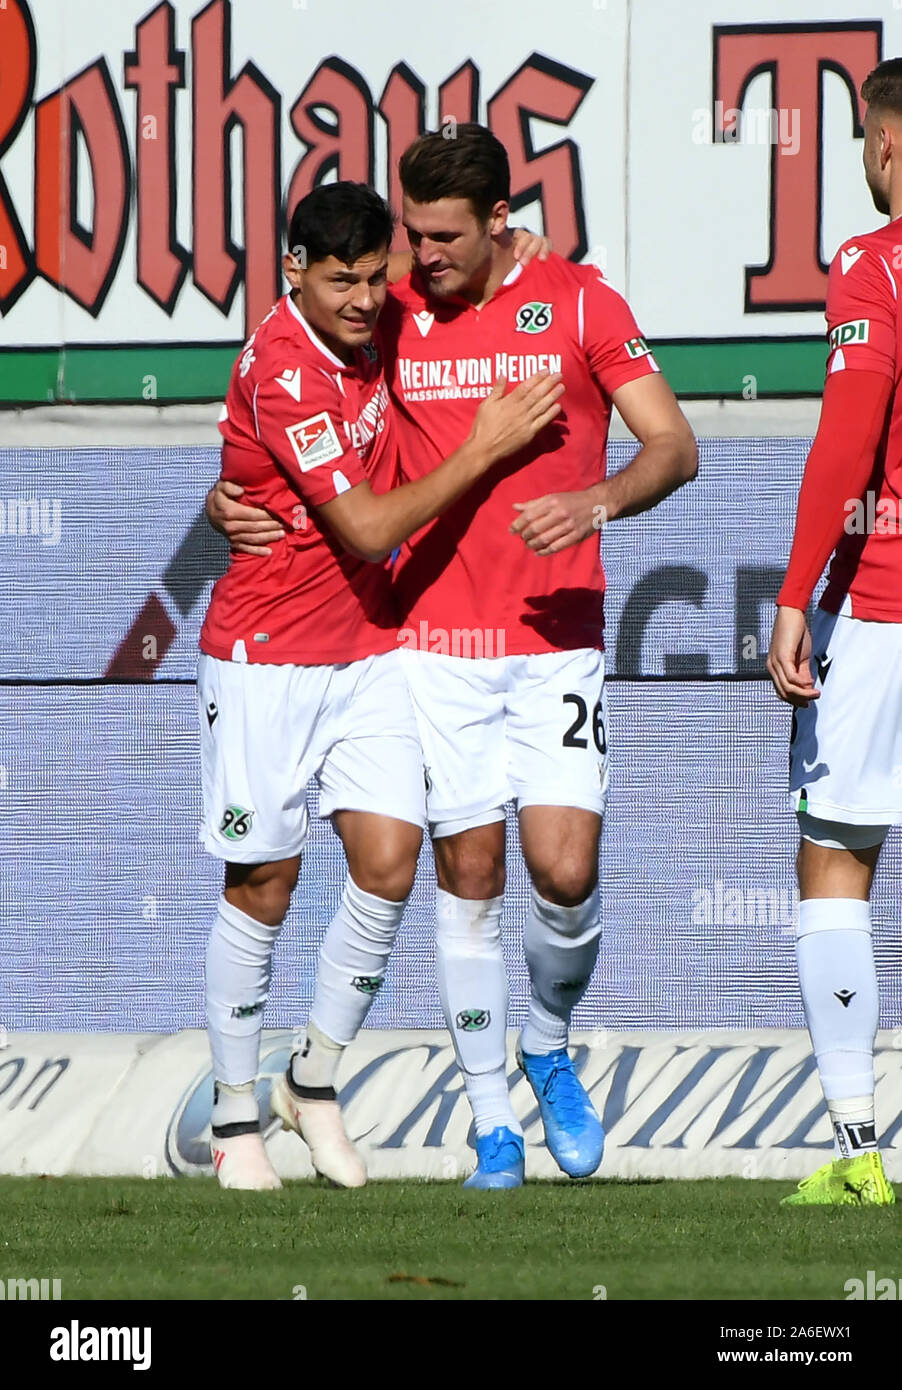 Karlsruhe, Germany. 26th Oct, 2019. Soccer: 2nd Bundesliga, Karlsruher SC - Hannover 96, 11th matchday in the Wildparkstadion. The Hanoverians Hendrik Weydandt (r) and Miiko Albornoz cheer the goal to 0:1 by Hendrik Weydandt. Credit: Uli Deck/dpa - IMPORTANT NOTE: In accordance with the requirements of the DFL Deutsche Fußball Liga or the DFB Deutscher Fußball-Bund, it is prohibited to use or have used photographs taken in the stadium and/or the match in the form of sequence images and/or video-like photo sequences./dpa/Alamy Live News Stock Photo